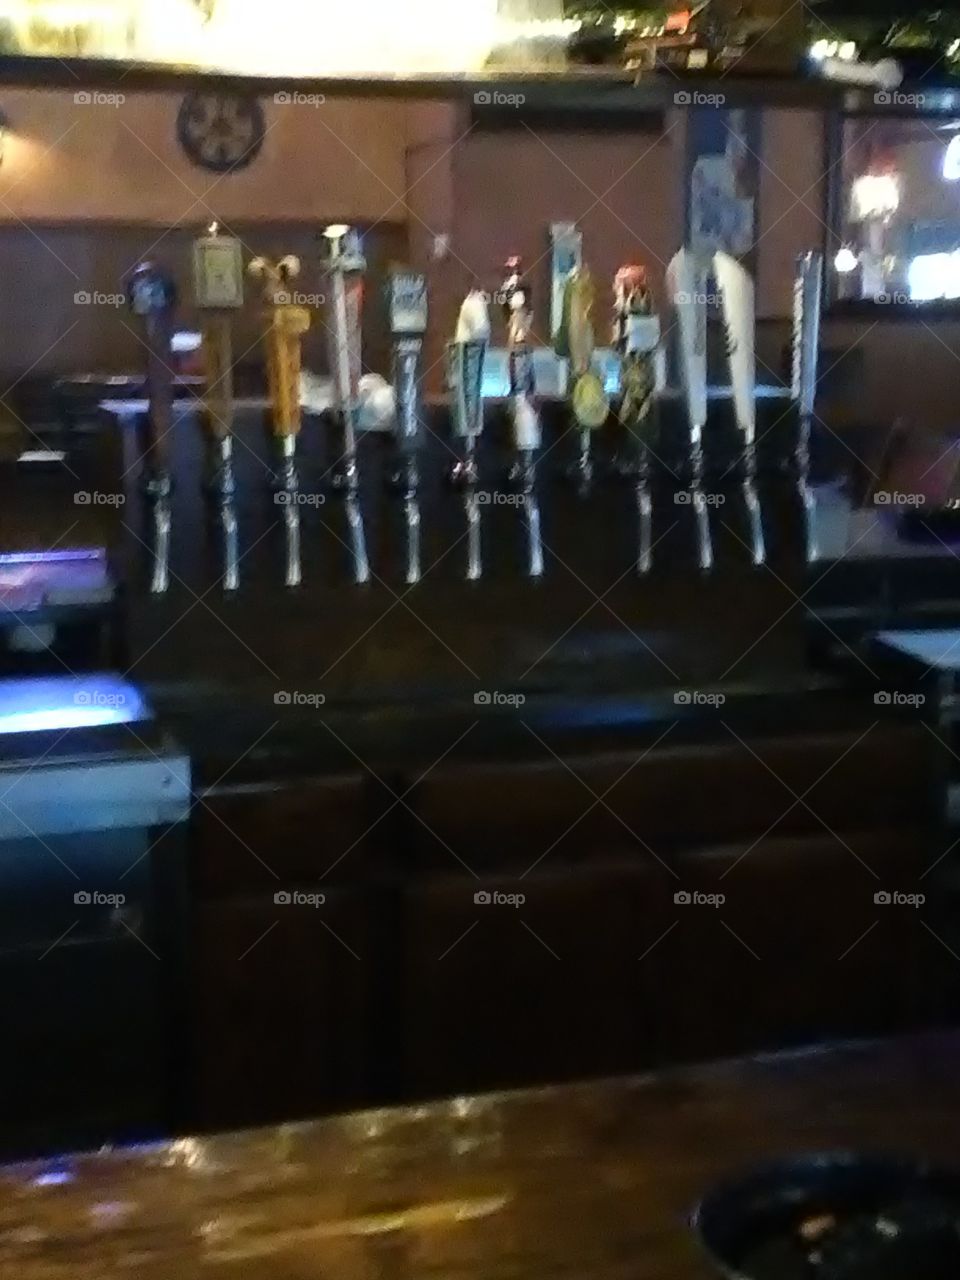 I find it hard to believe it. There so many Different types of beer on tap.